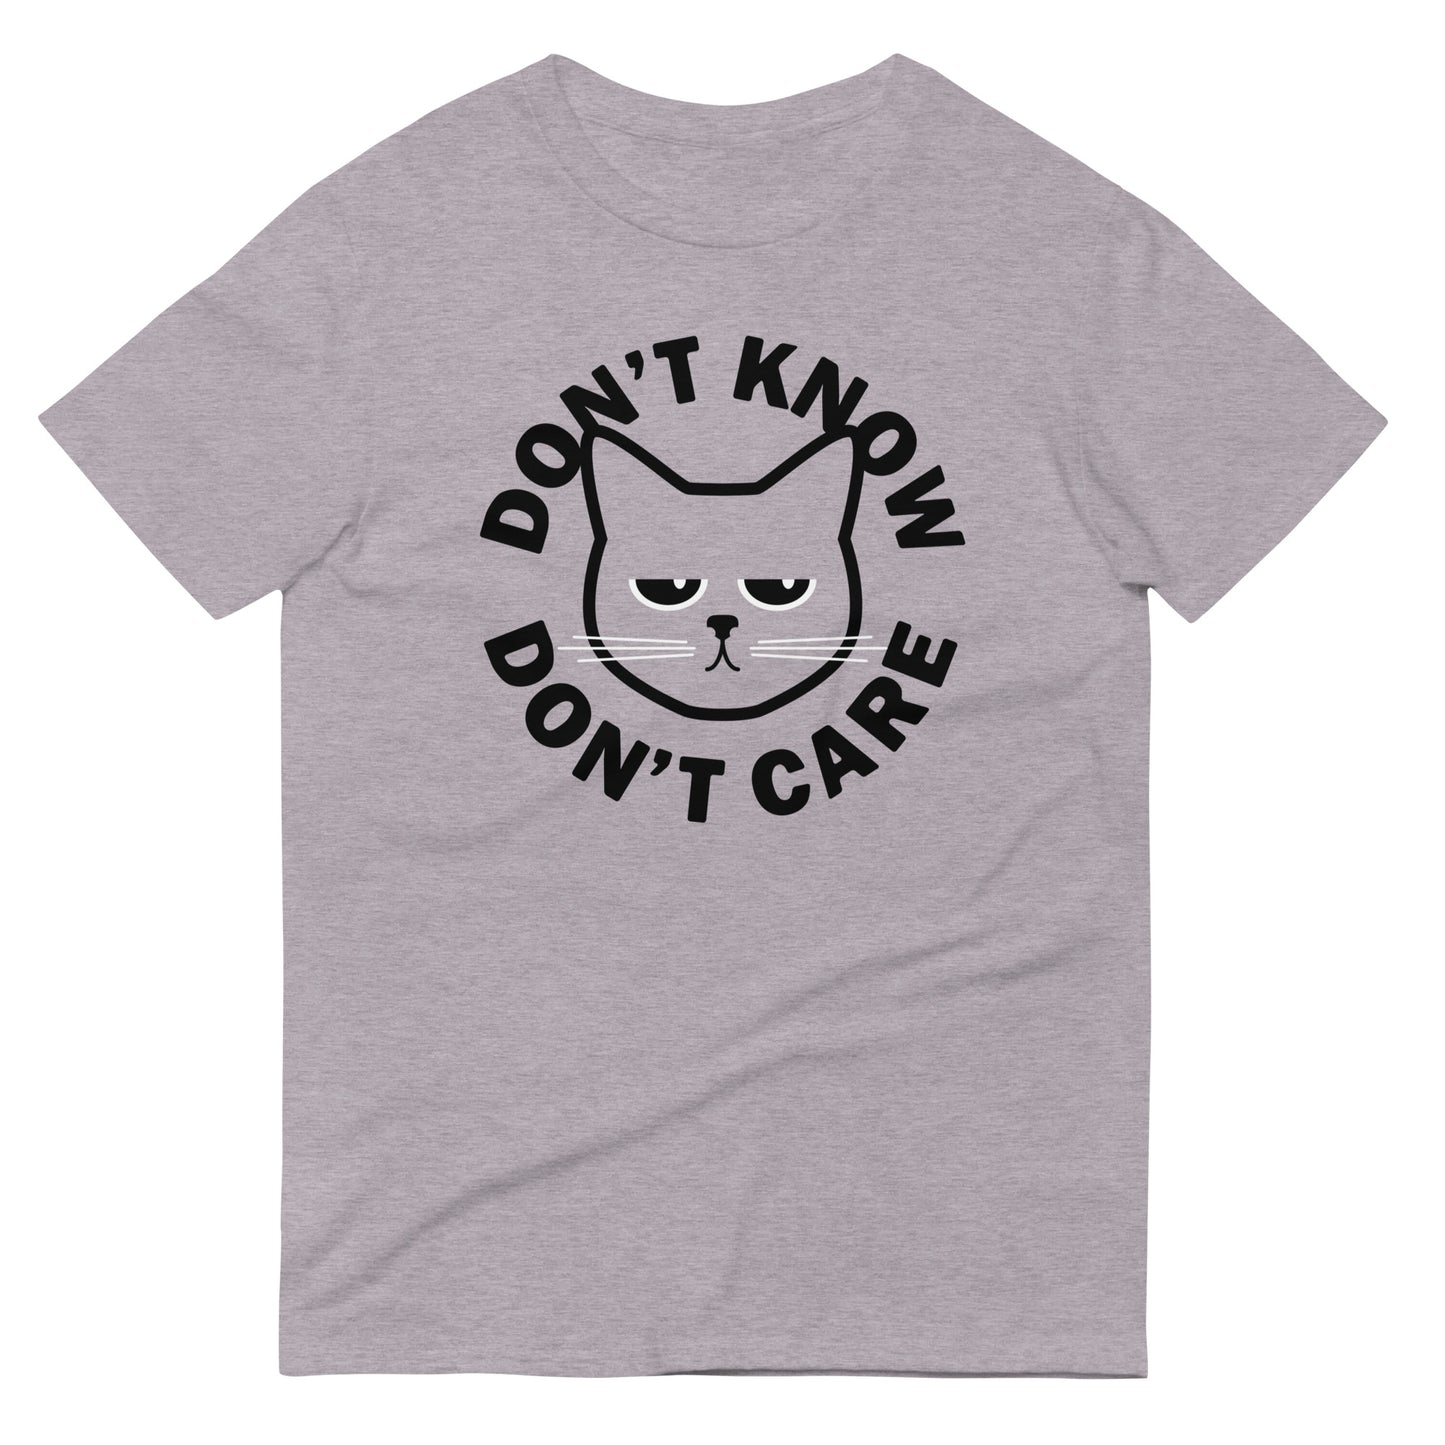 Don't Know Don't Care Men's Signature Tee